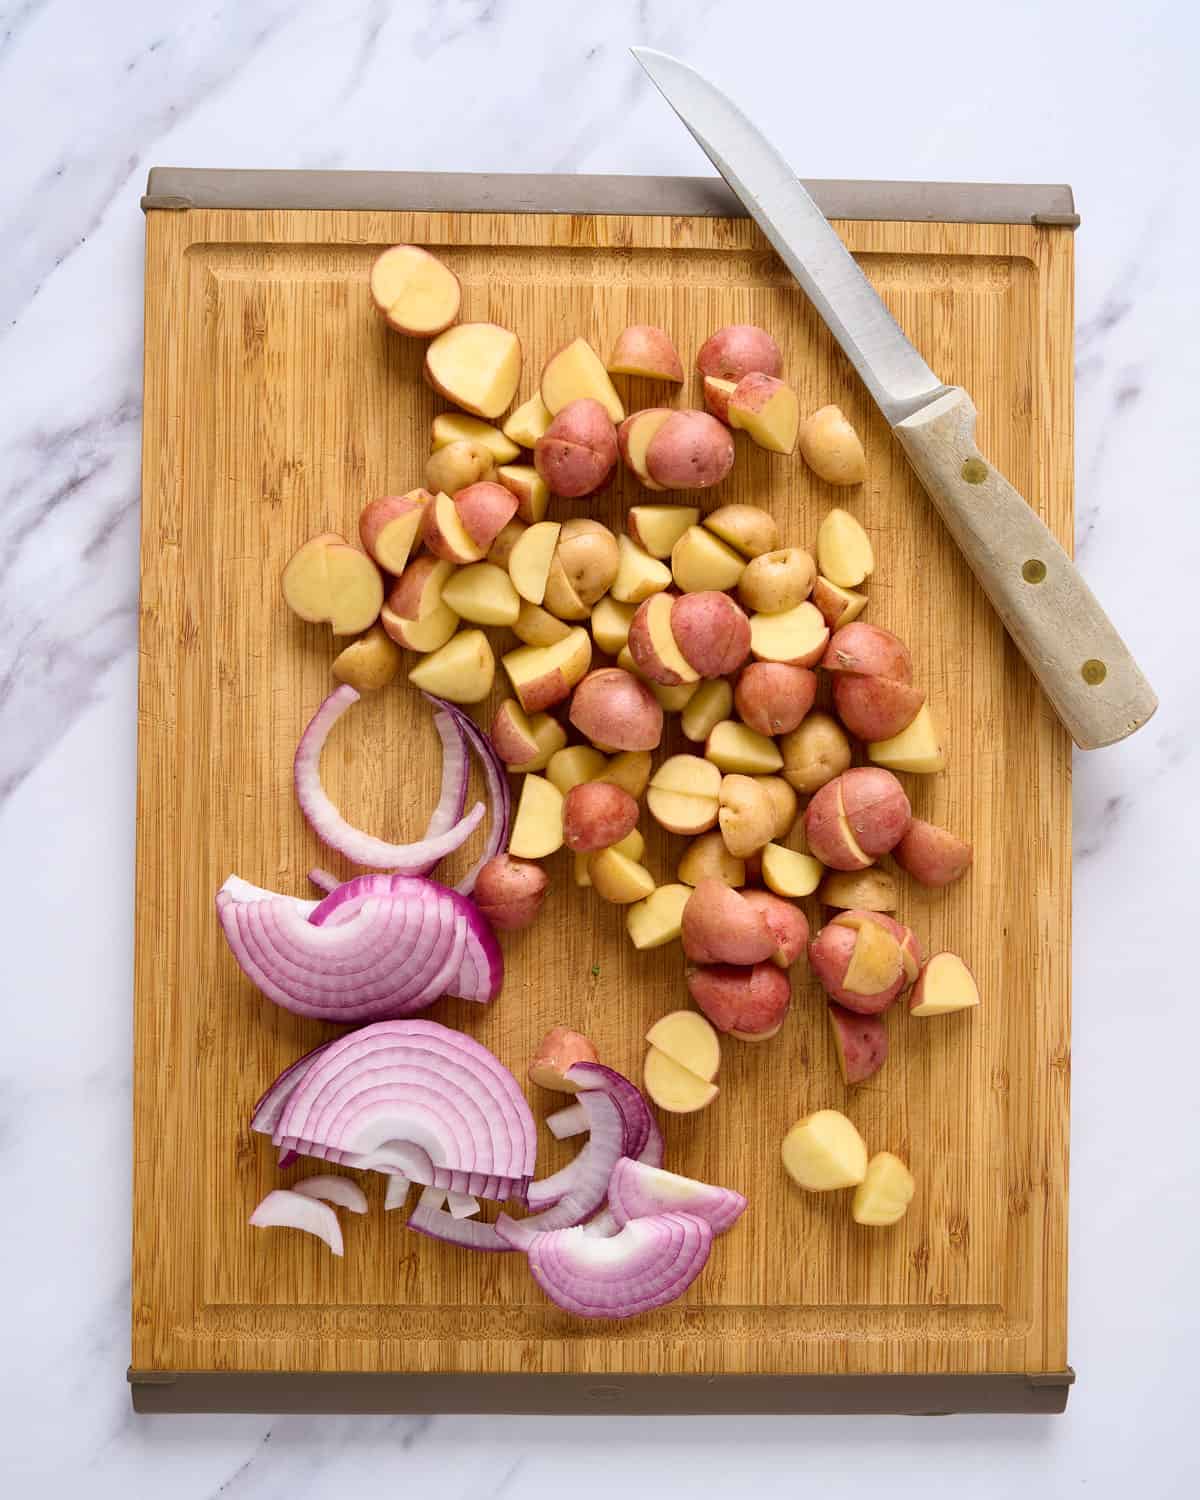 Sliced onions and potatoes on a cutting board.